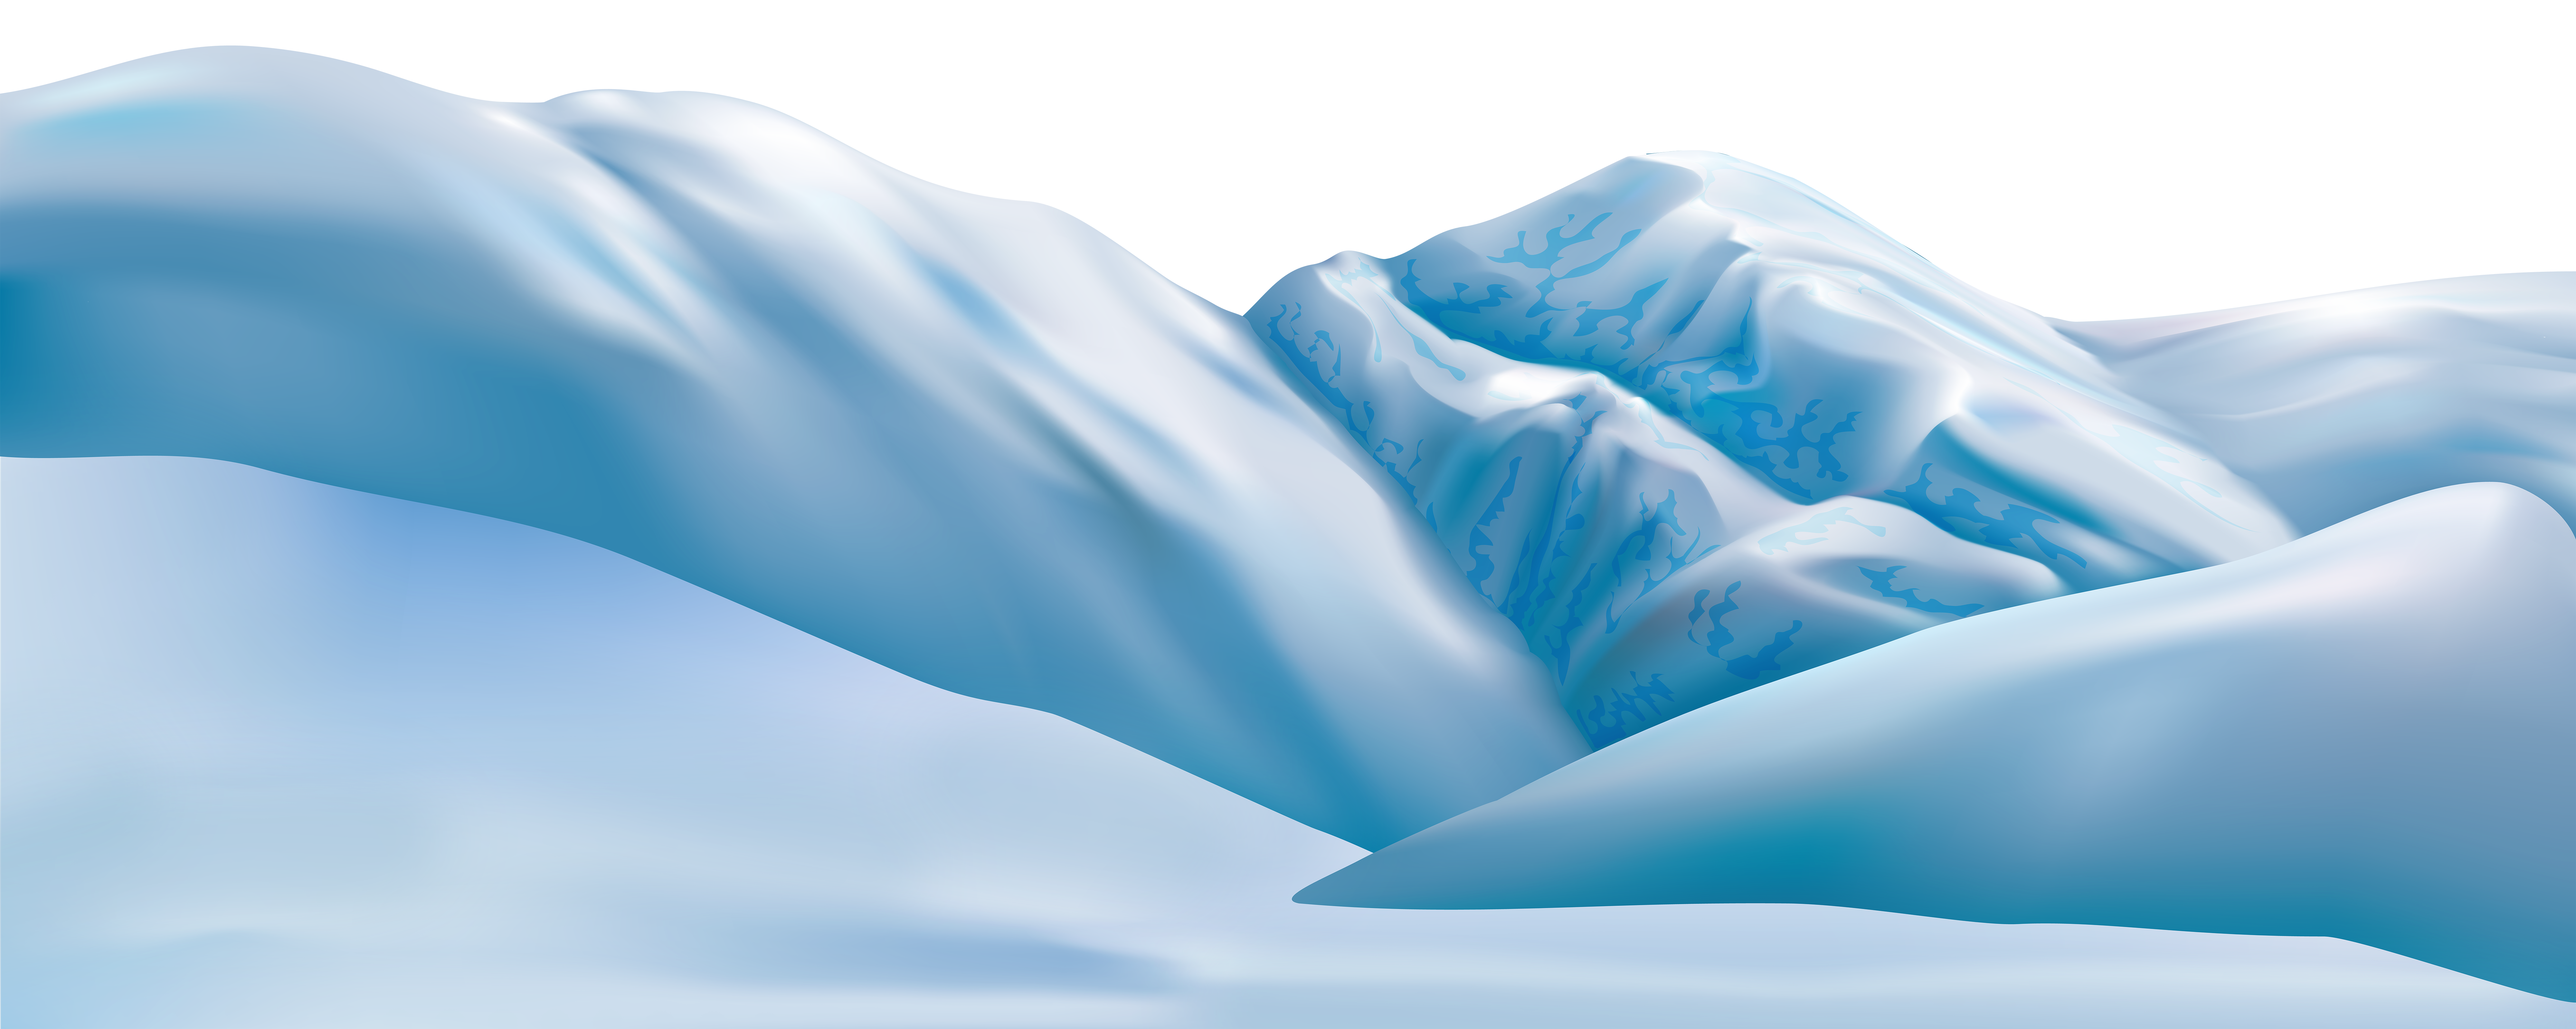 Snowy Mountain Transparent PNG Image | Gallery Yopriceville - High